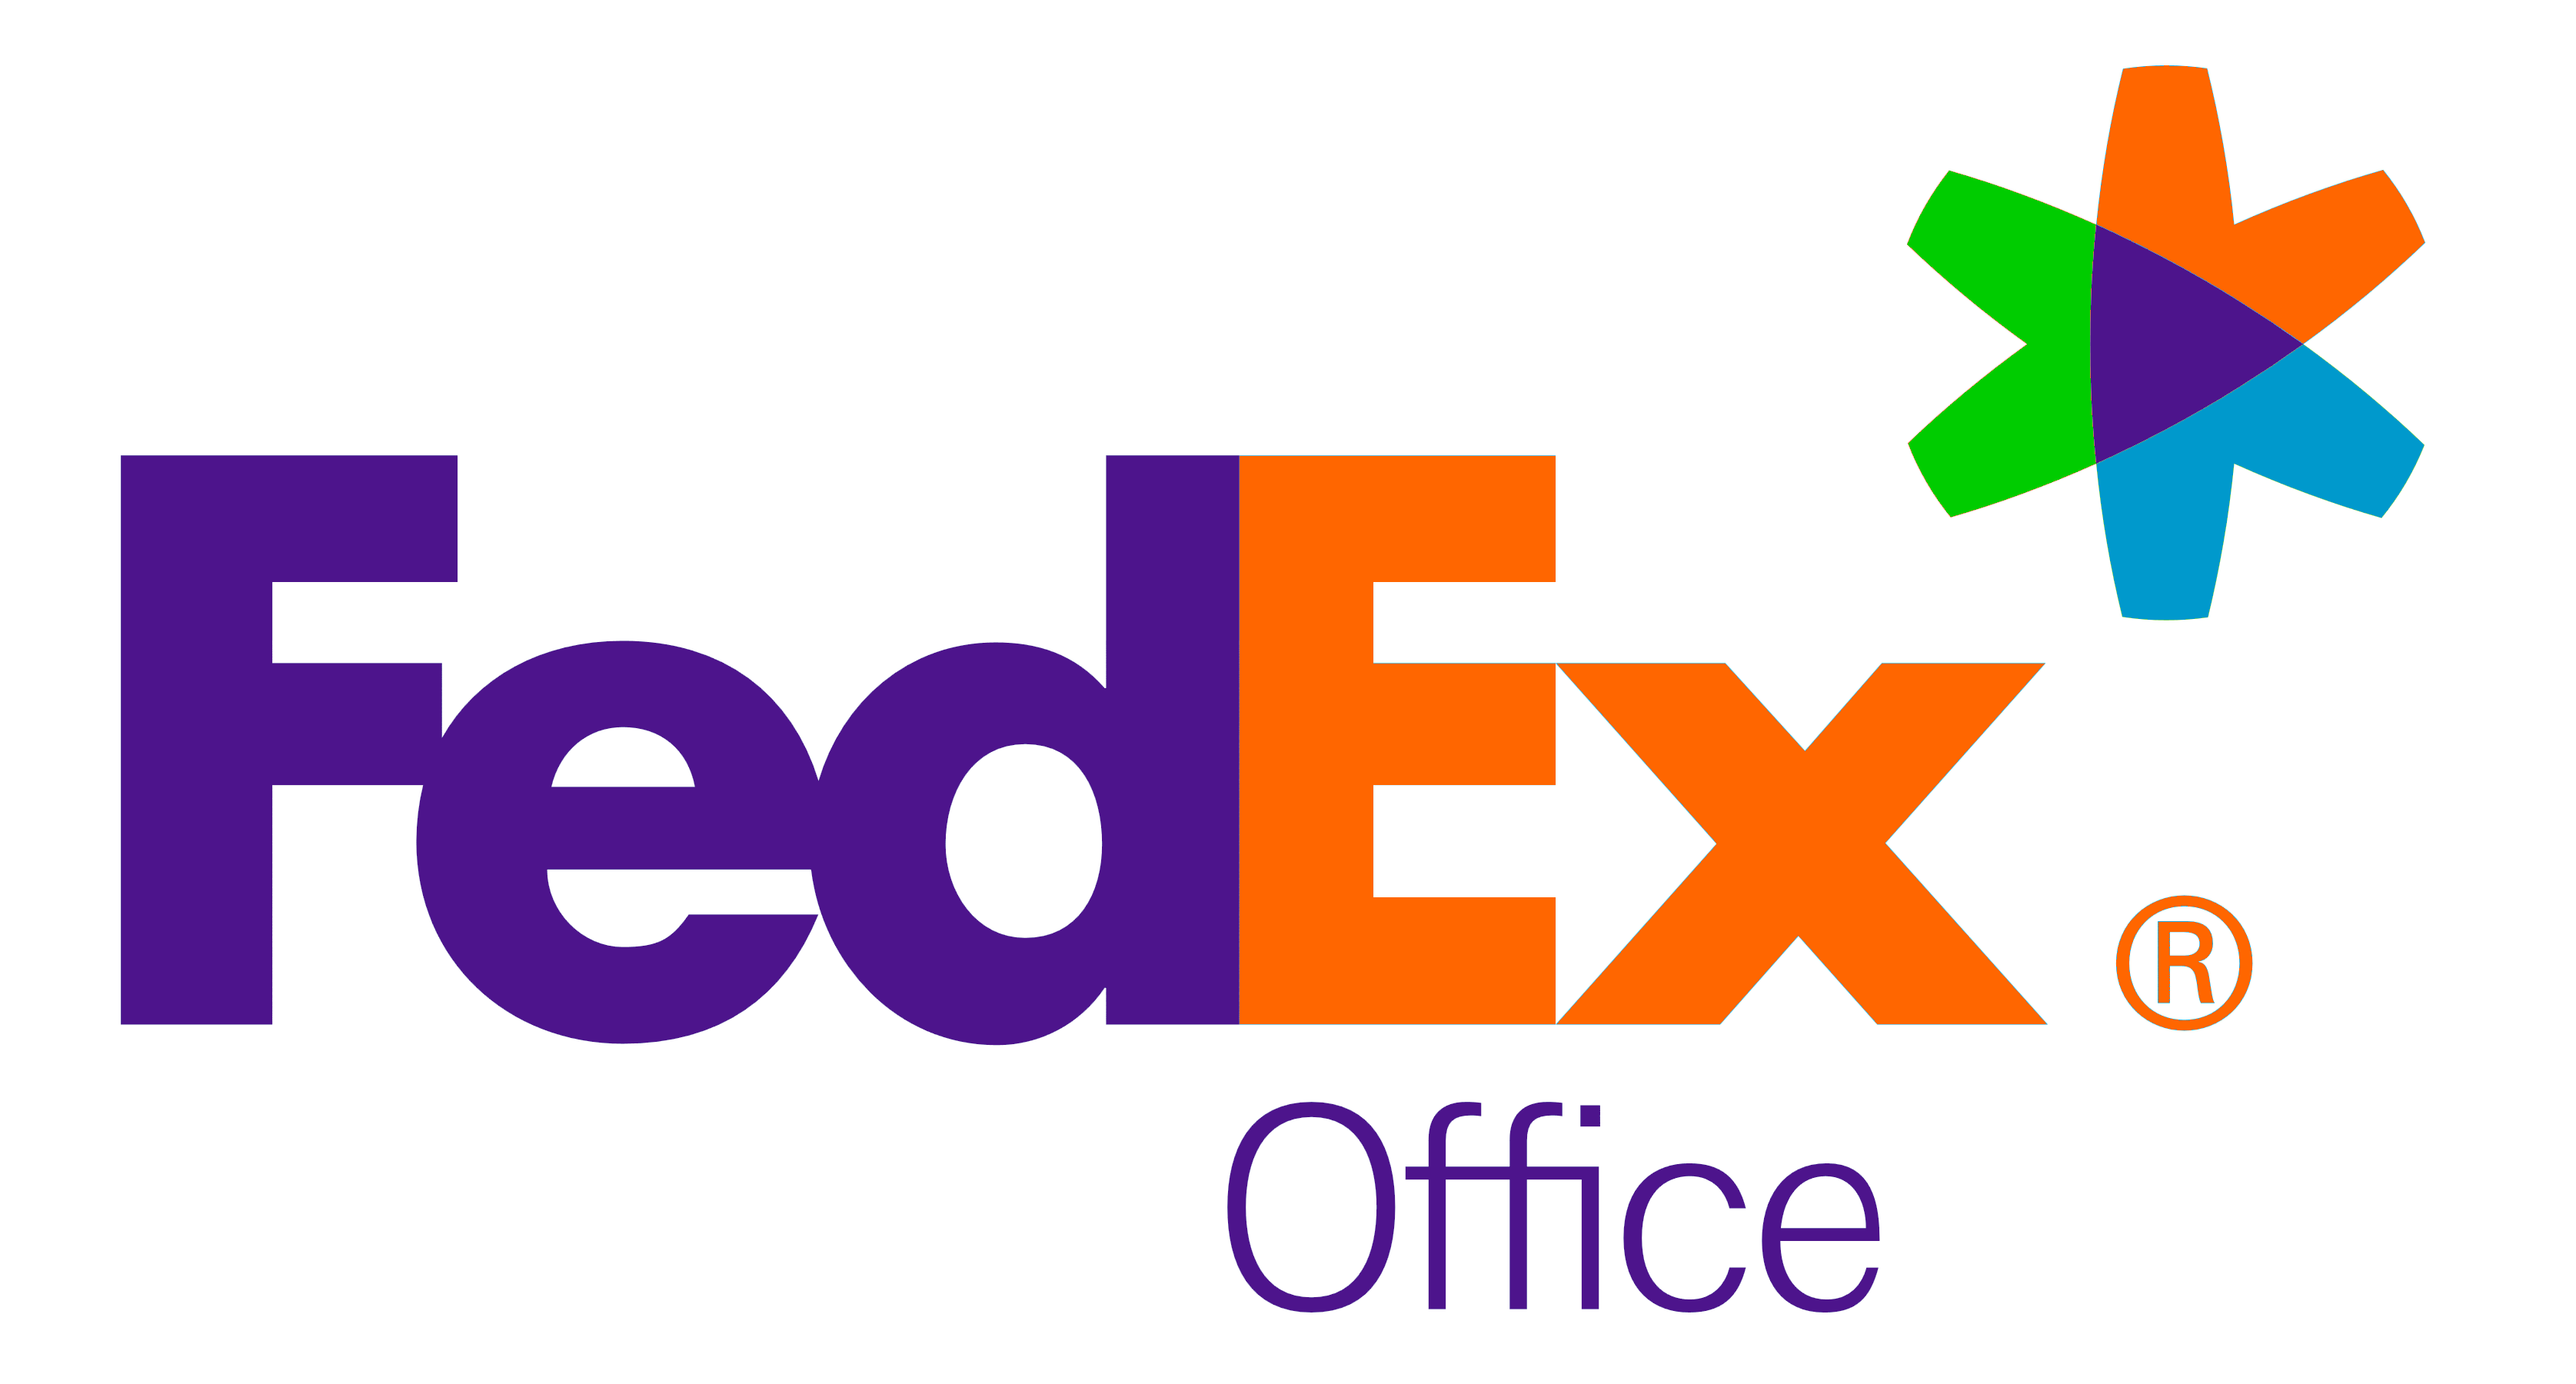 Logo Fedex Office Png - Fedex Express Logo Download For Free, Transparent background PNG HD thumbnail